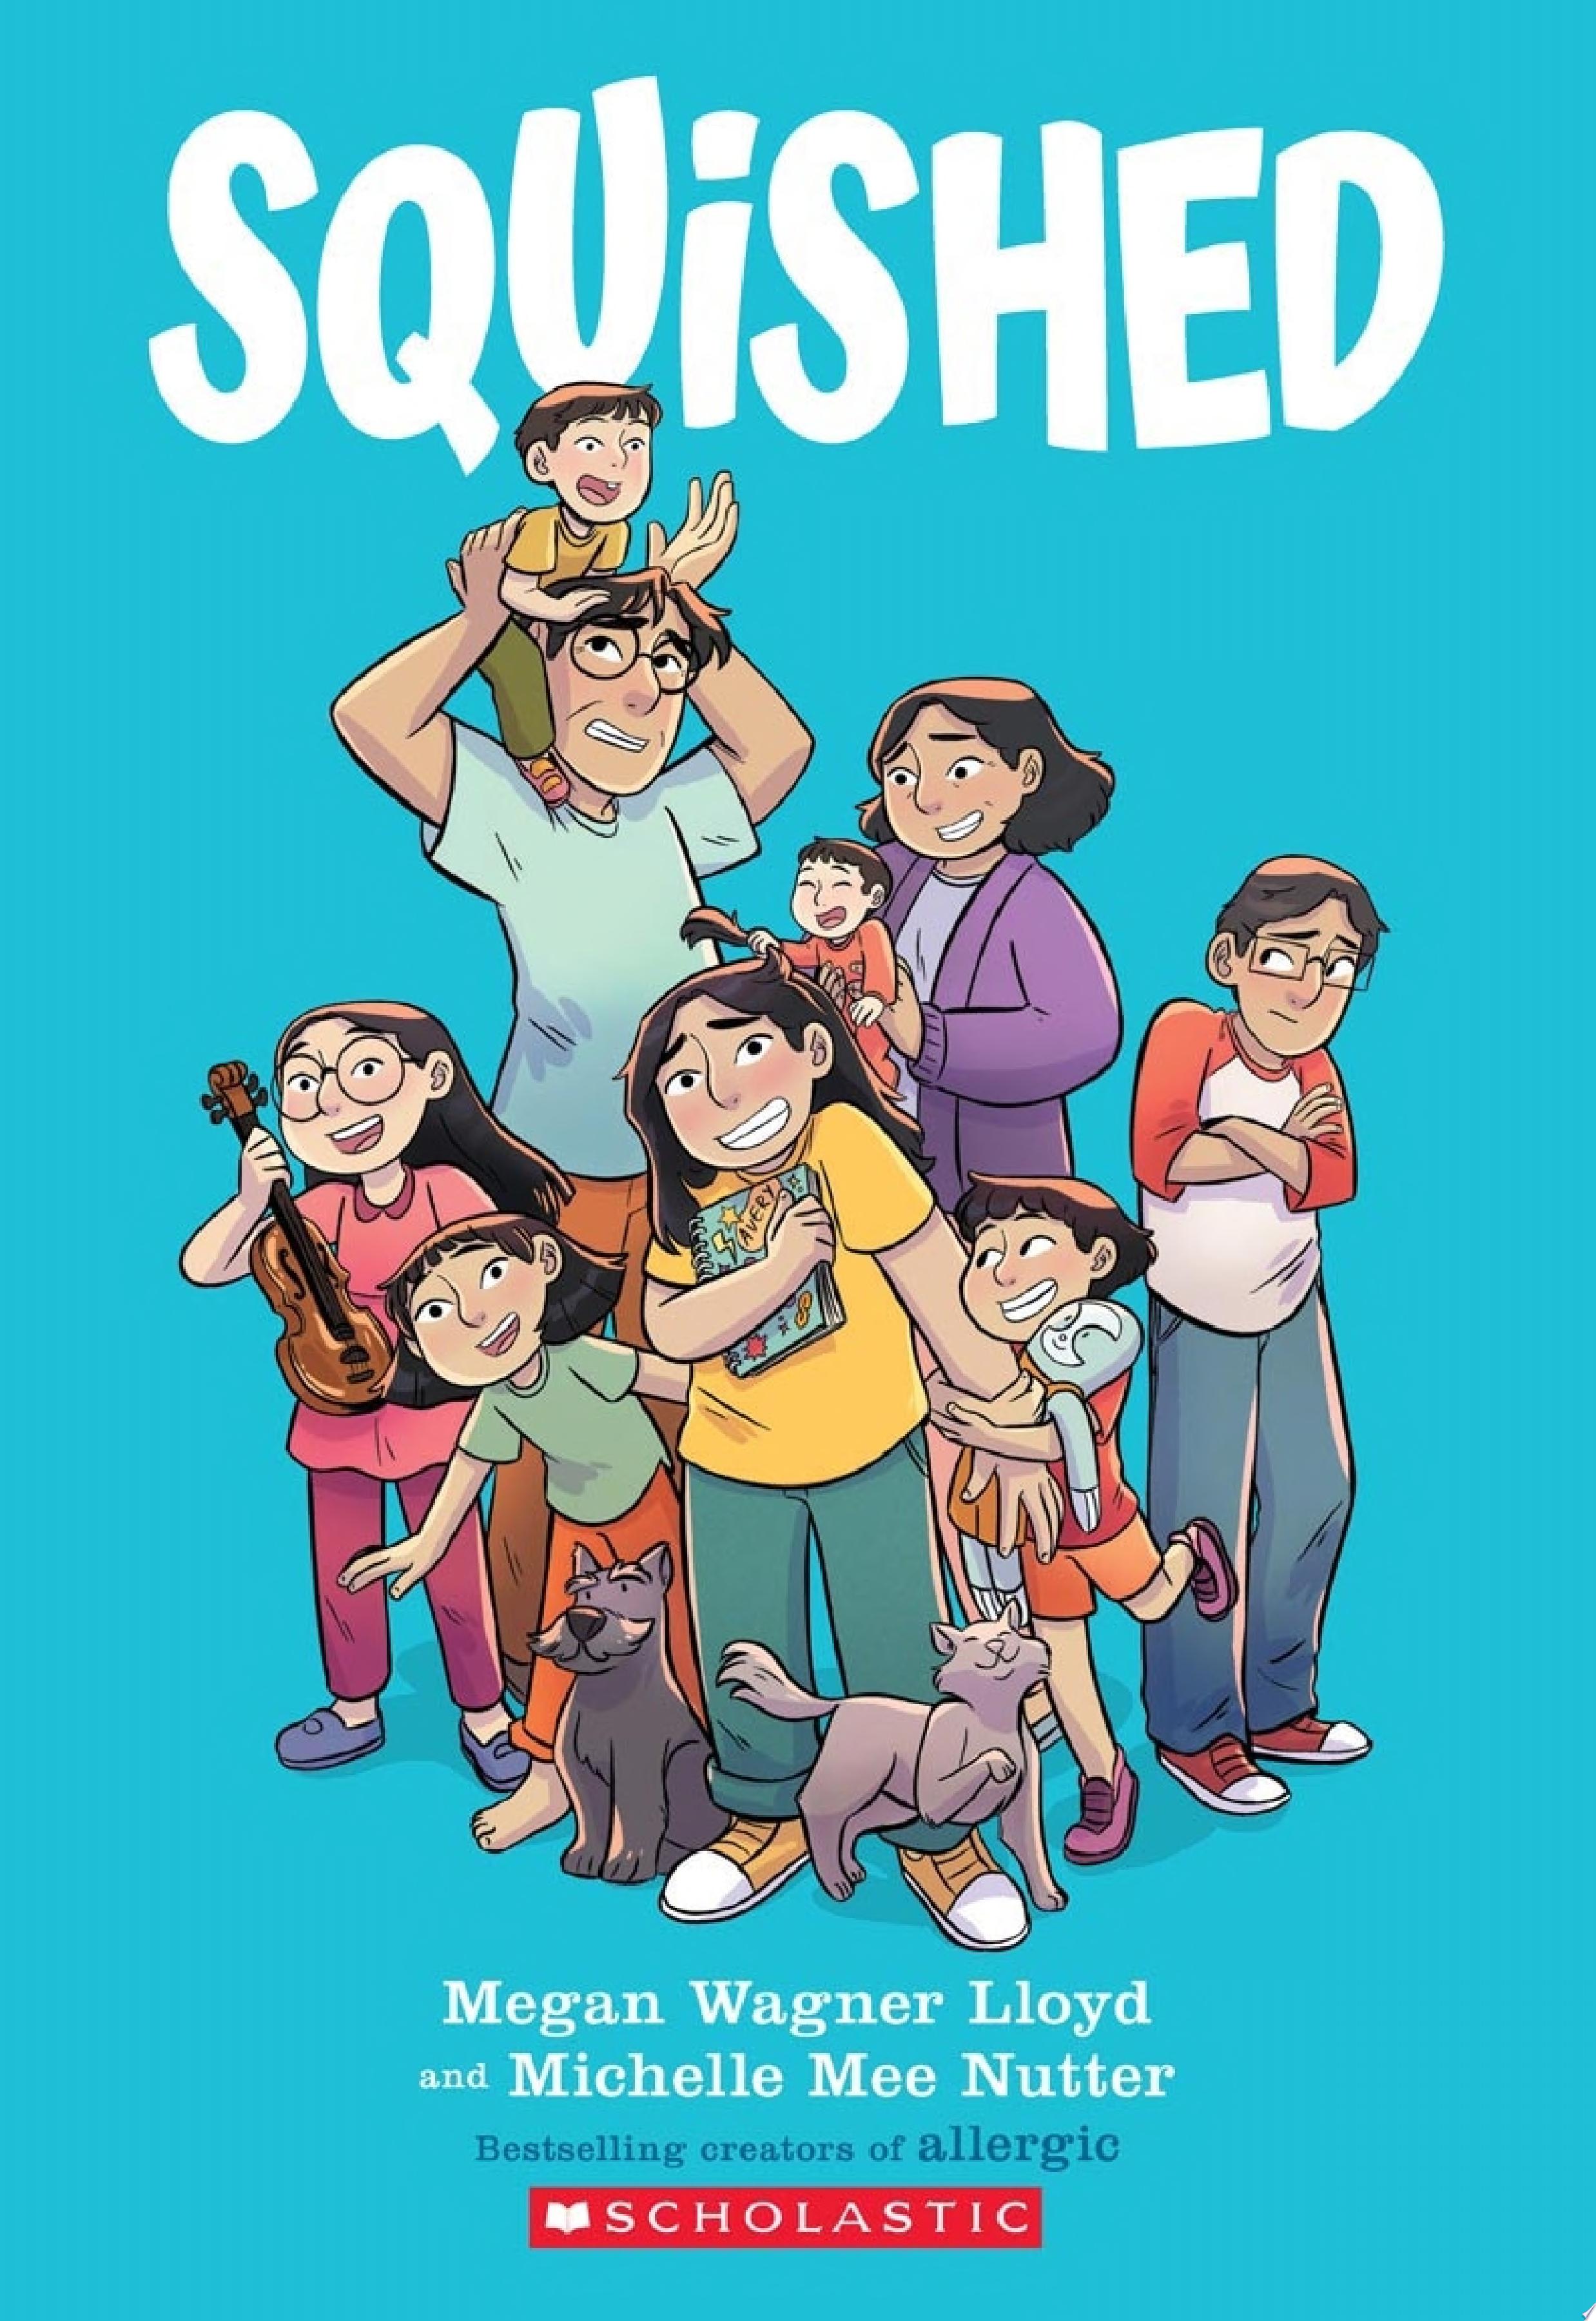 Image for "Squished: A Graphic Novel"